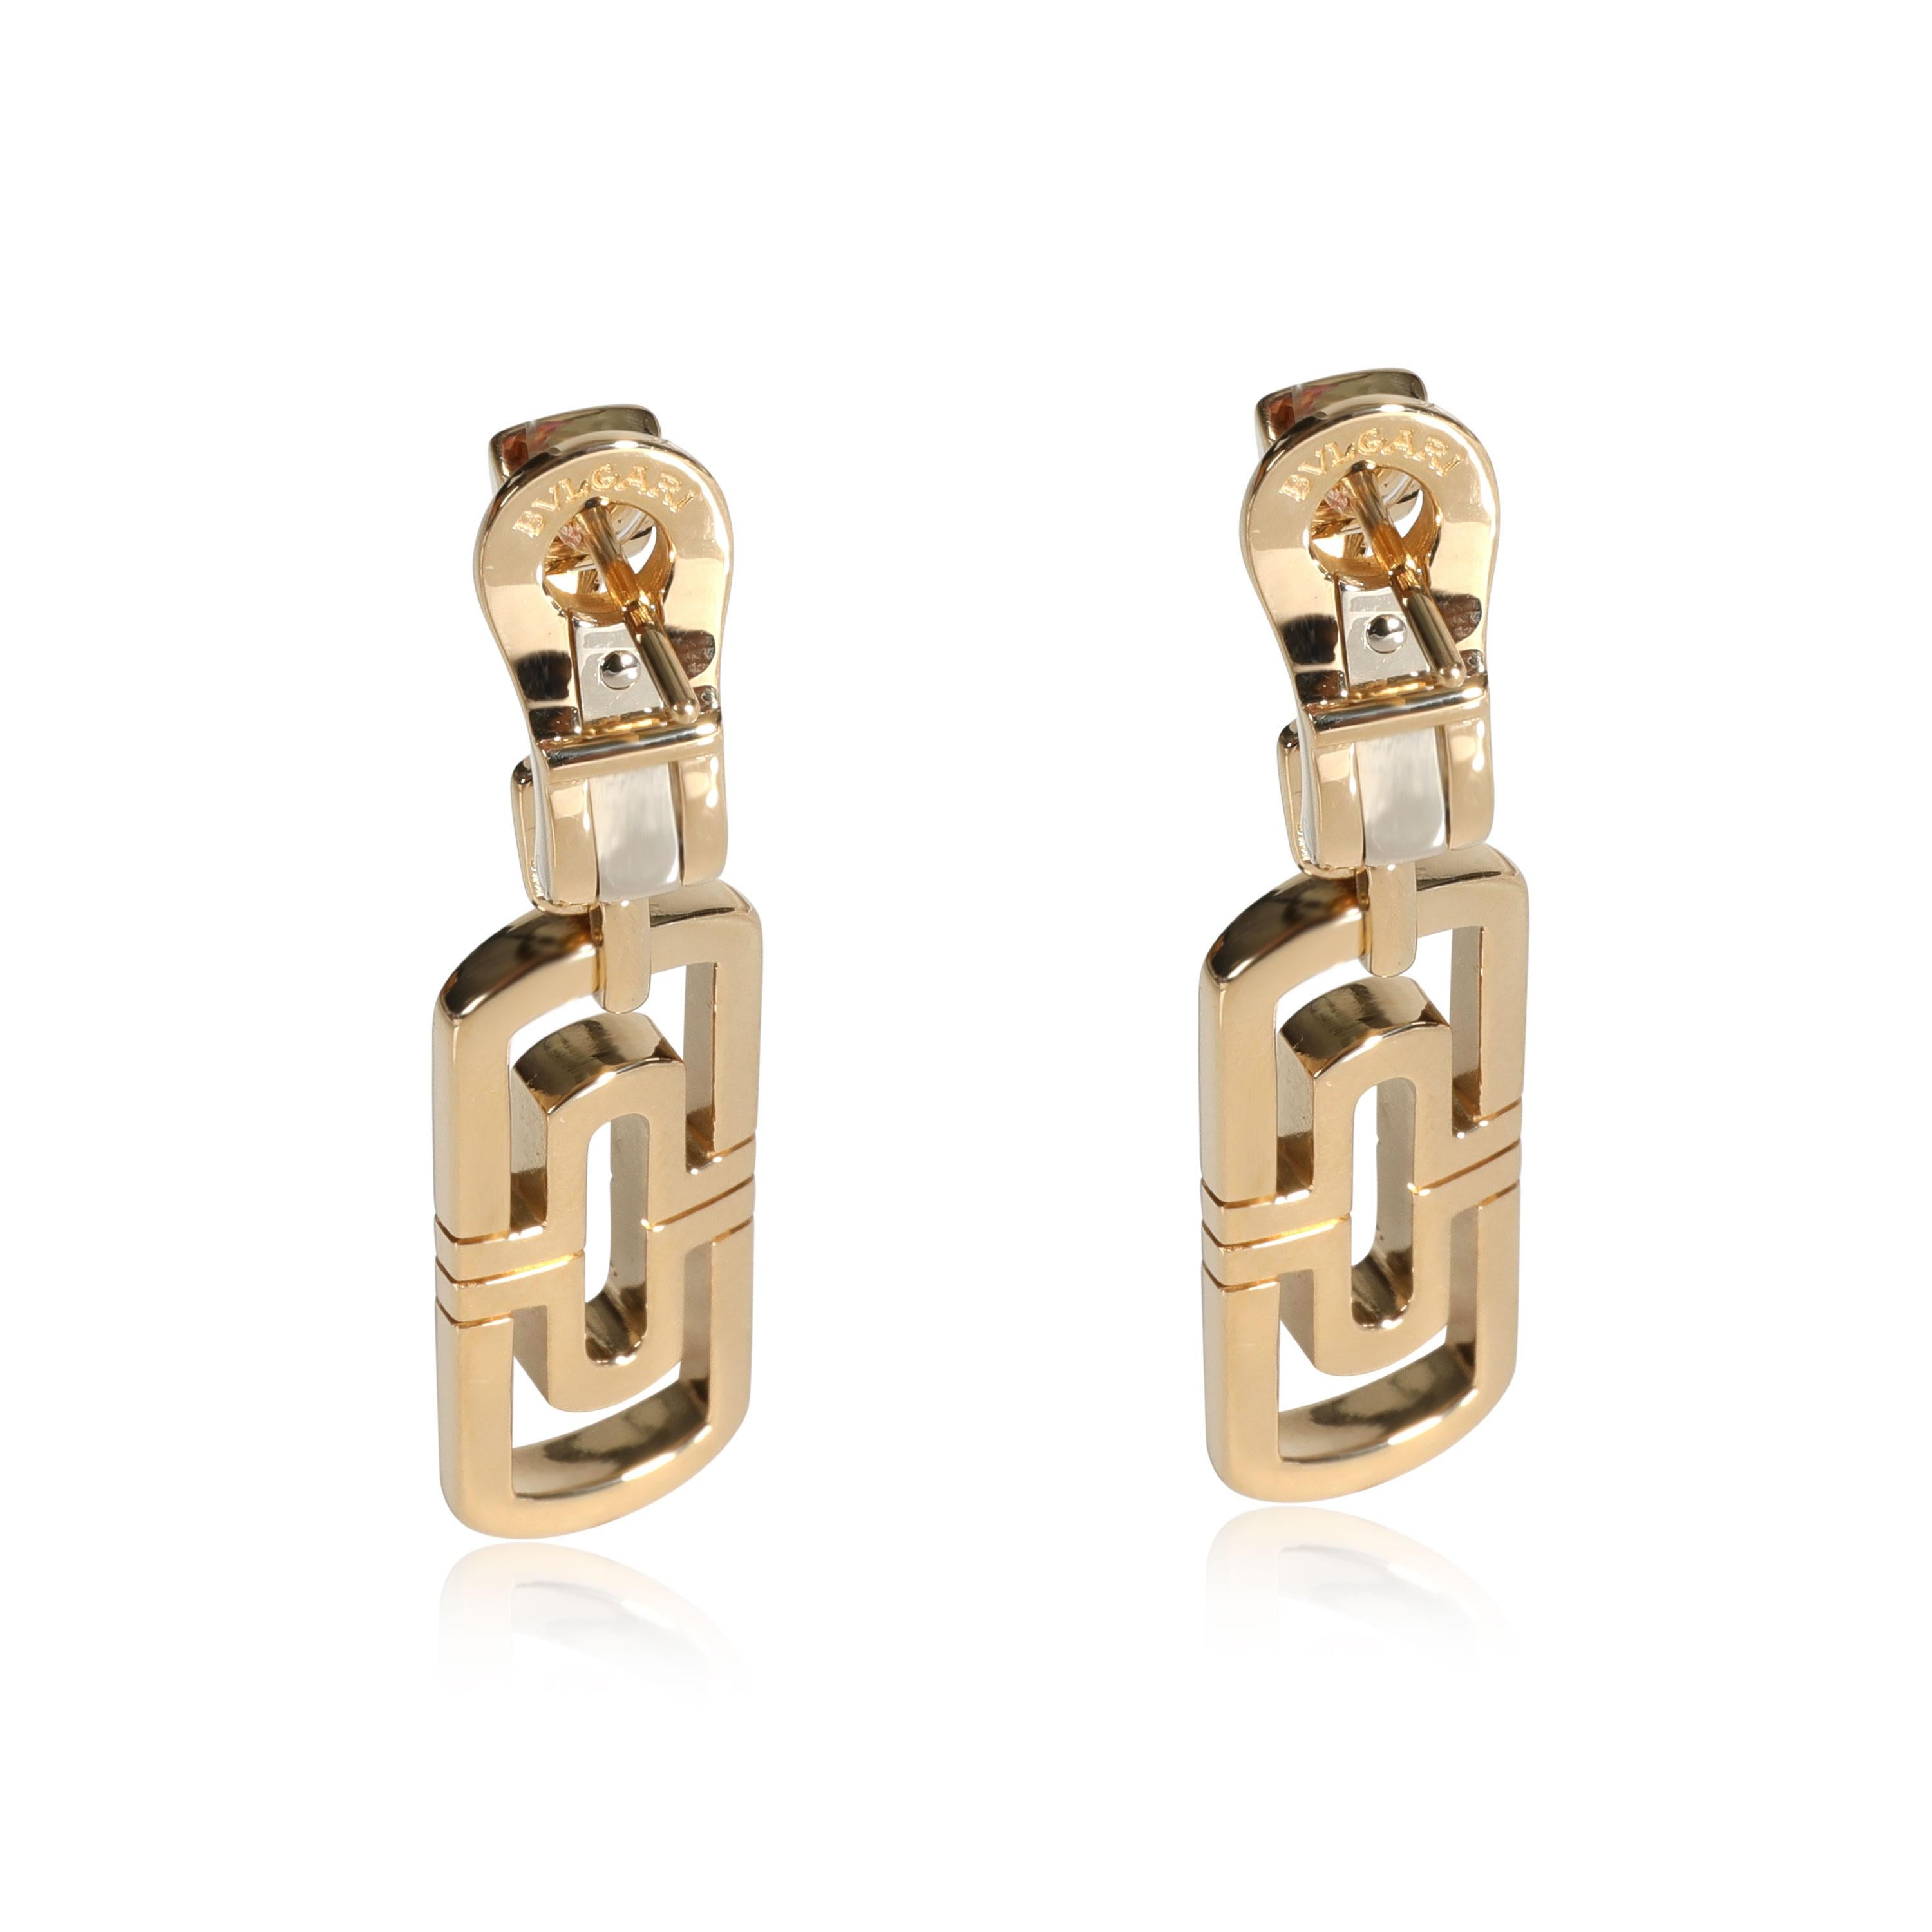 Bulgari Parentesi Drop Earrings in 18K Yellow Gold

PRIMARY DETAILS
SKU: 112326
Listing Title: Bulgari Parentesi Drop Earrings in 18K Yellow Gold
Condition Description: Retails for 3900 USD. In excellent condition and recently polished. Length is